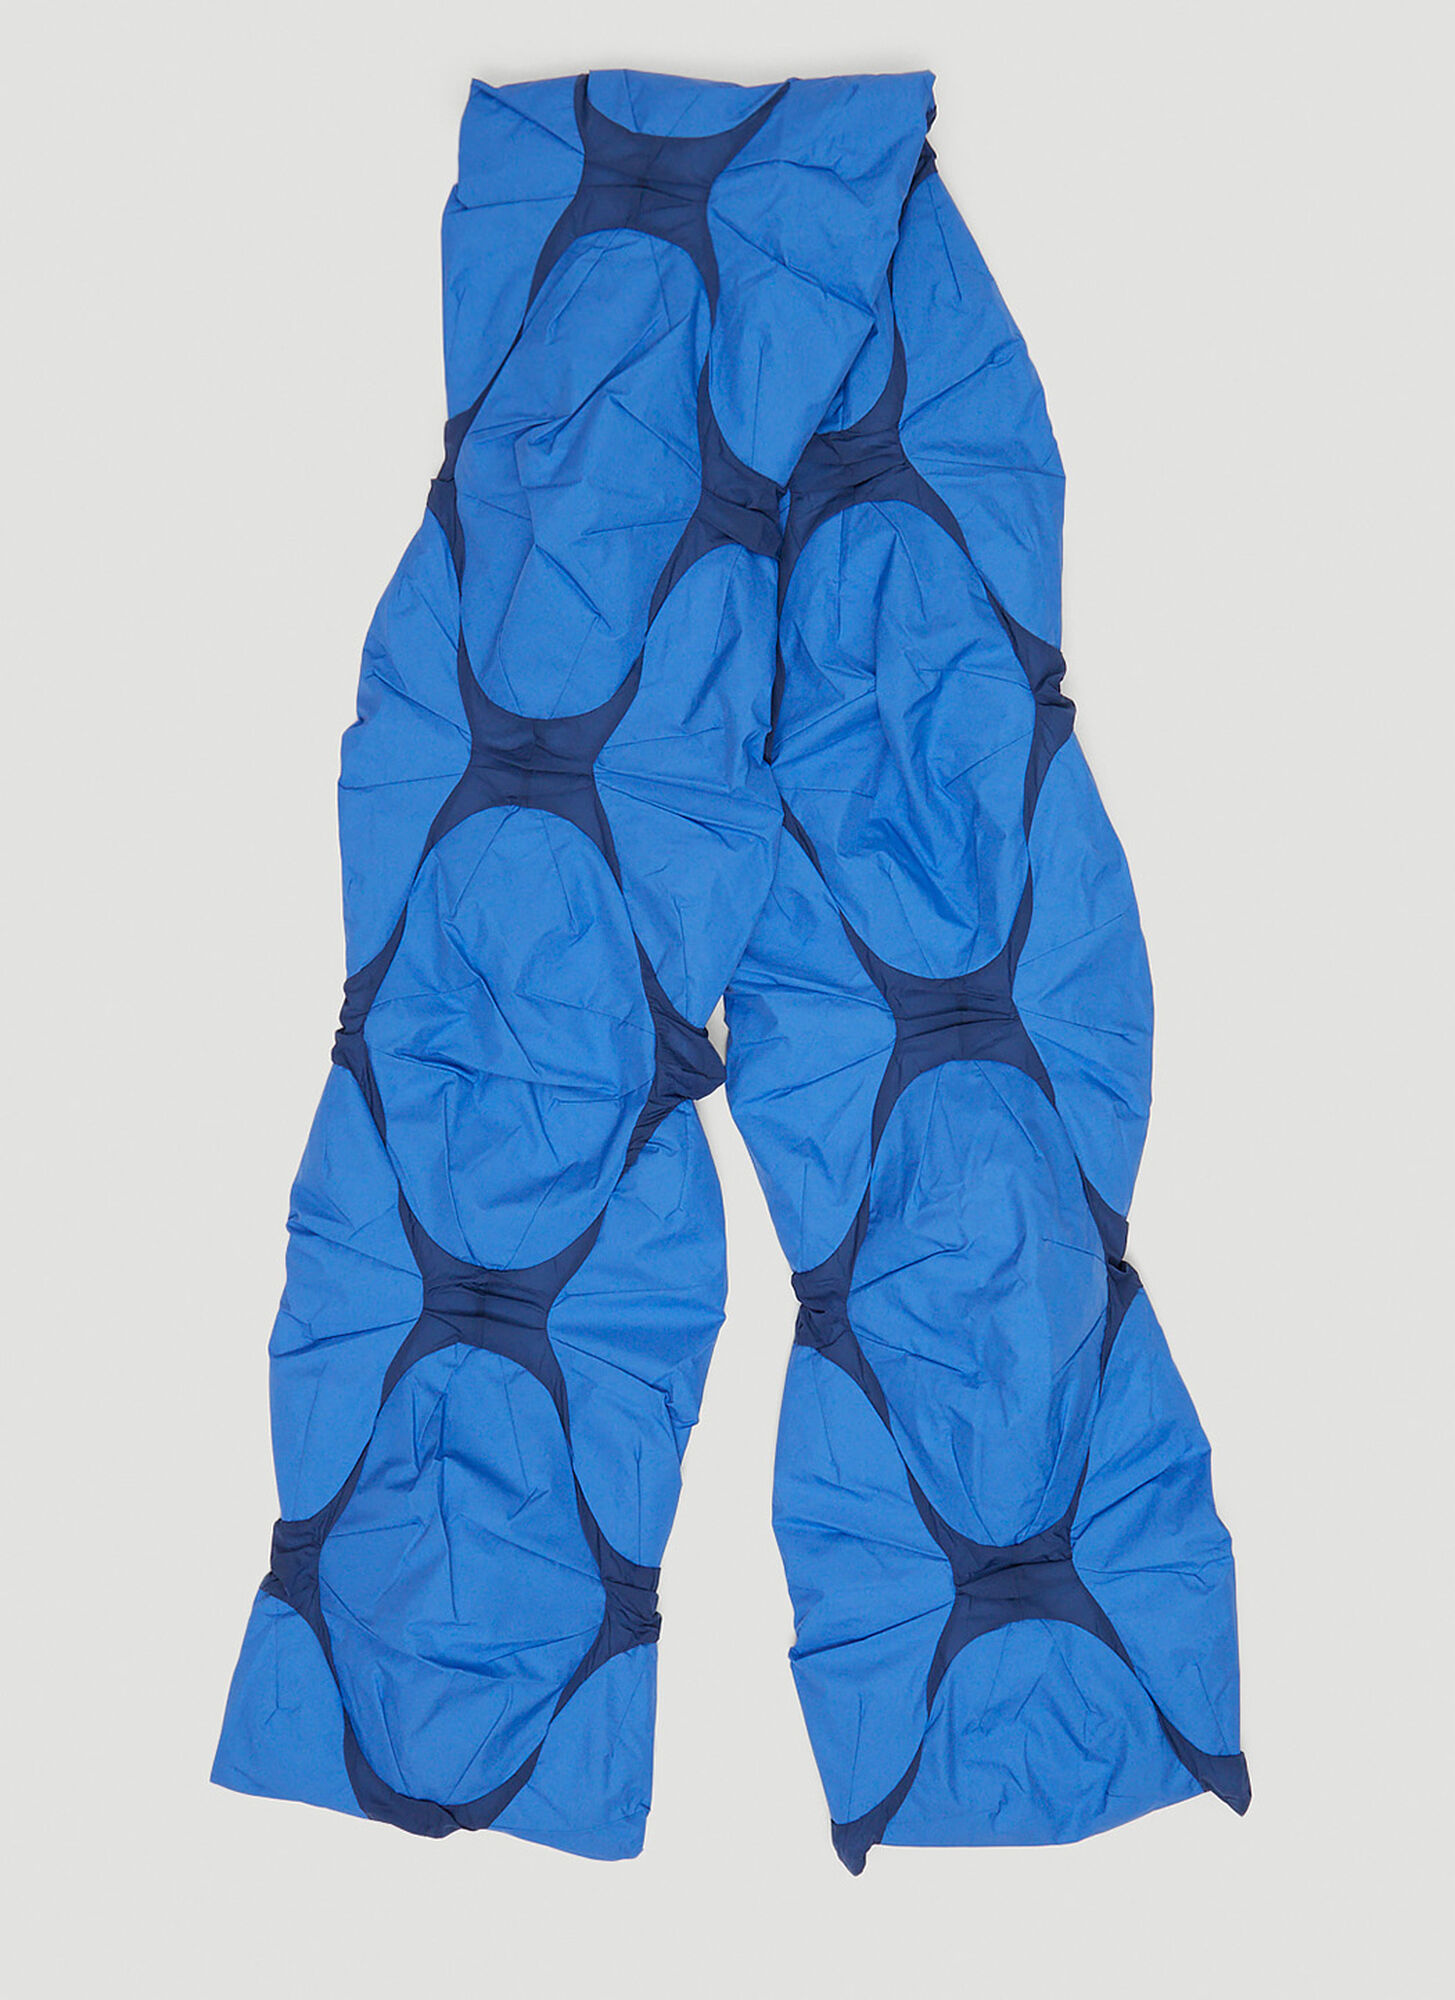 Post Archive Faction (paf) 4.0+ Left Scarf In Blue